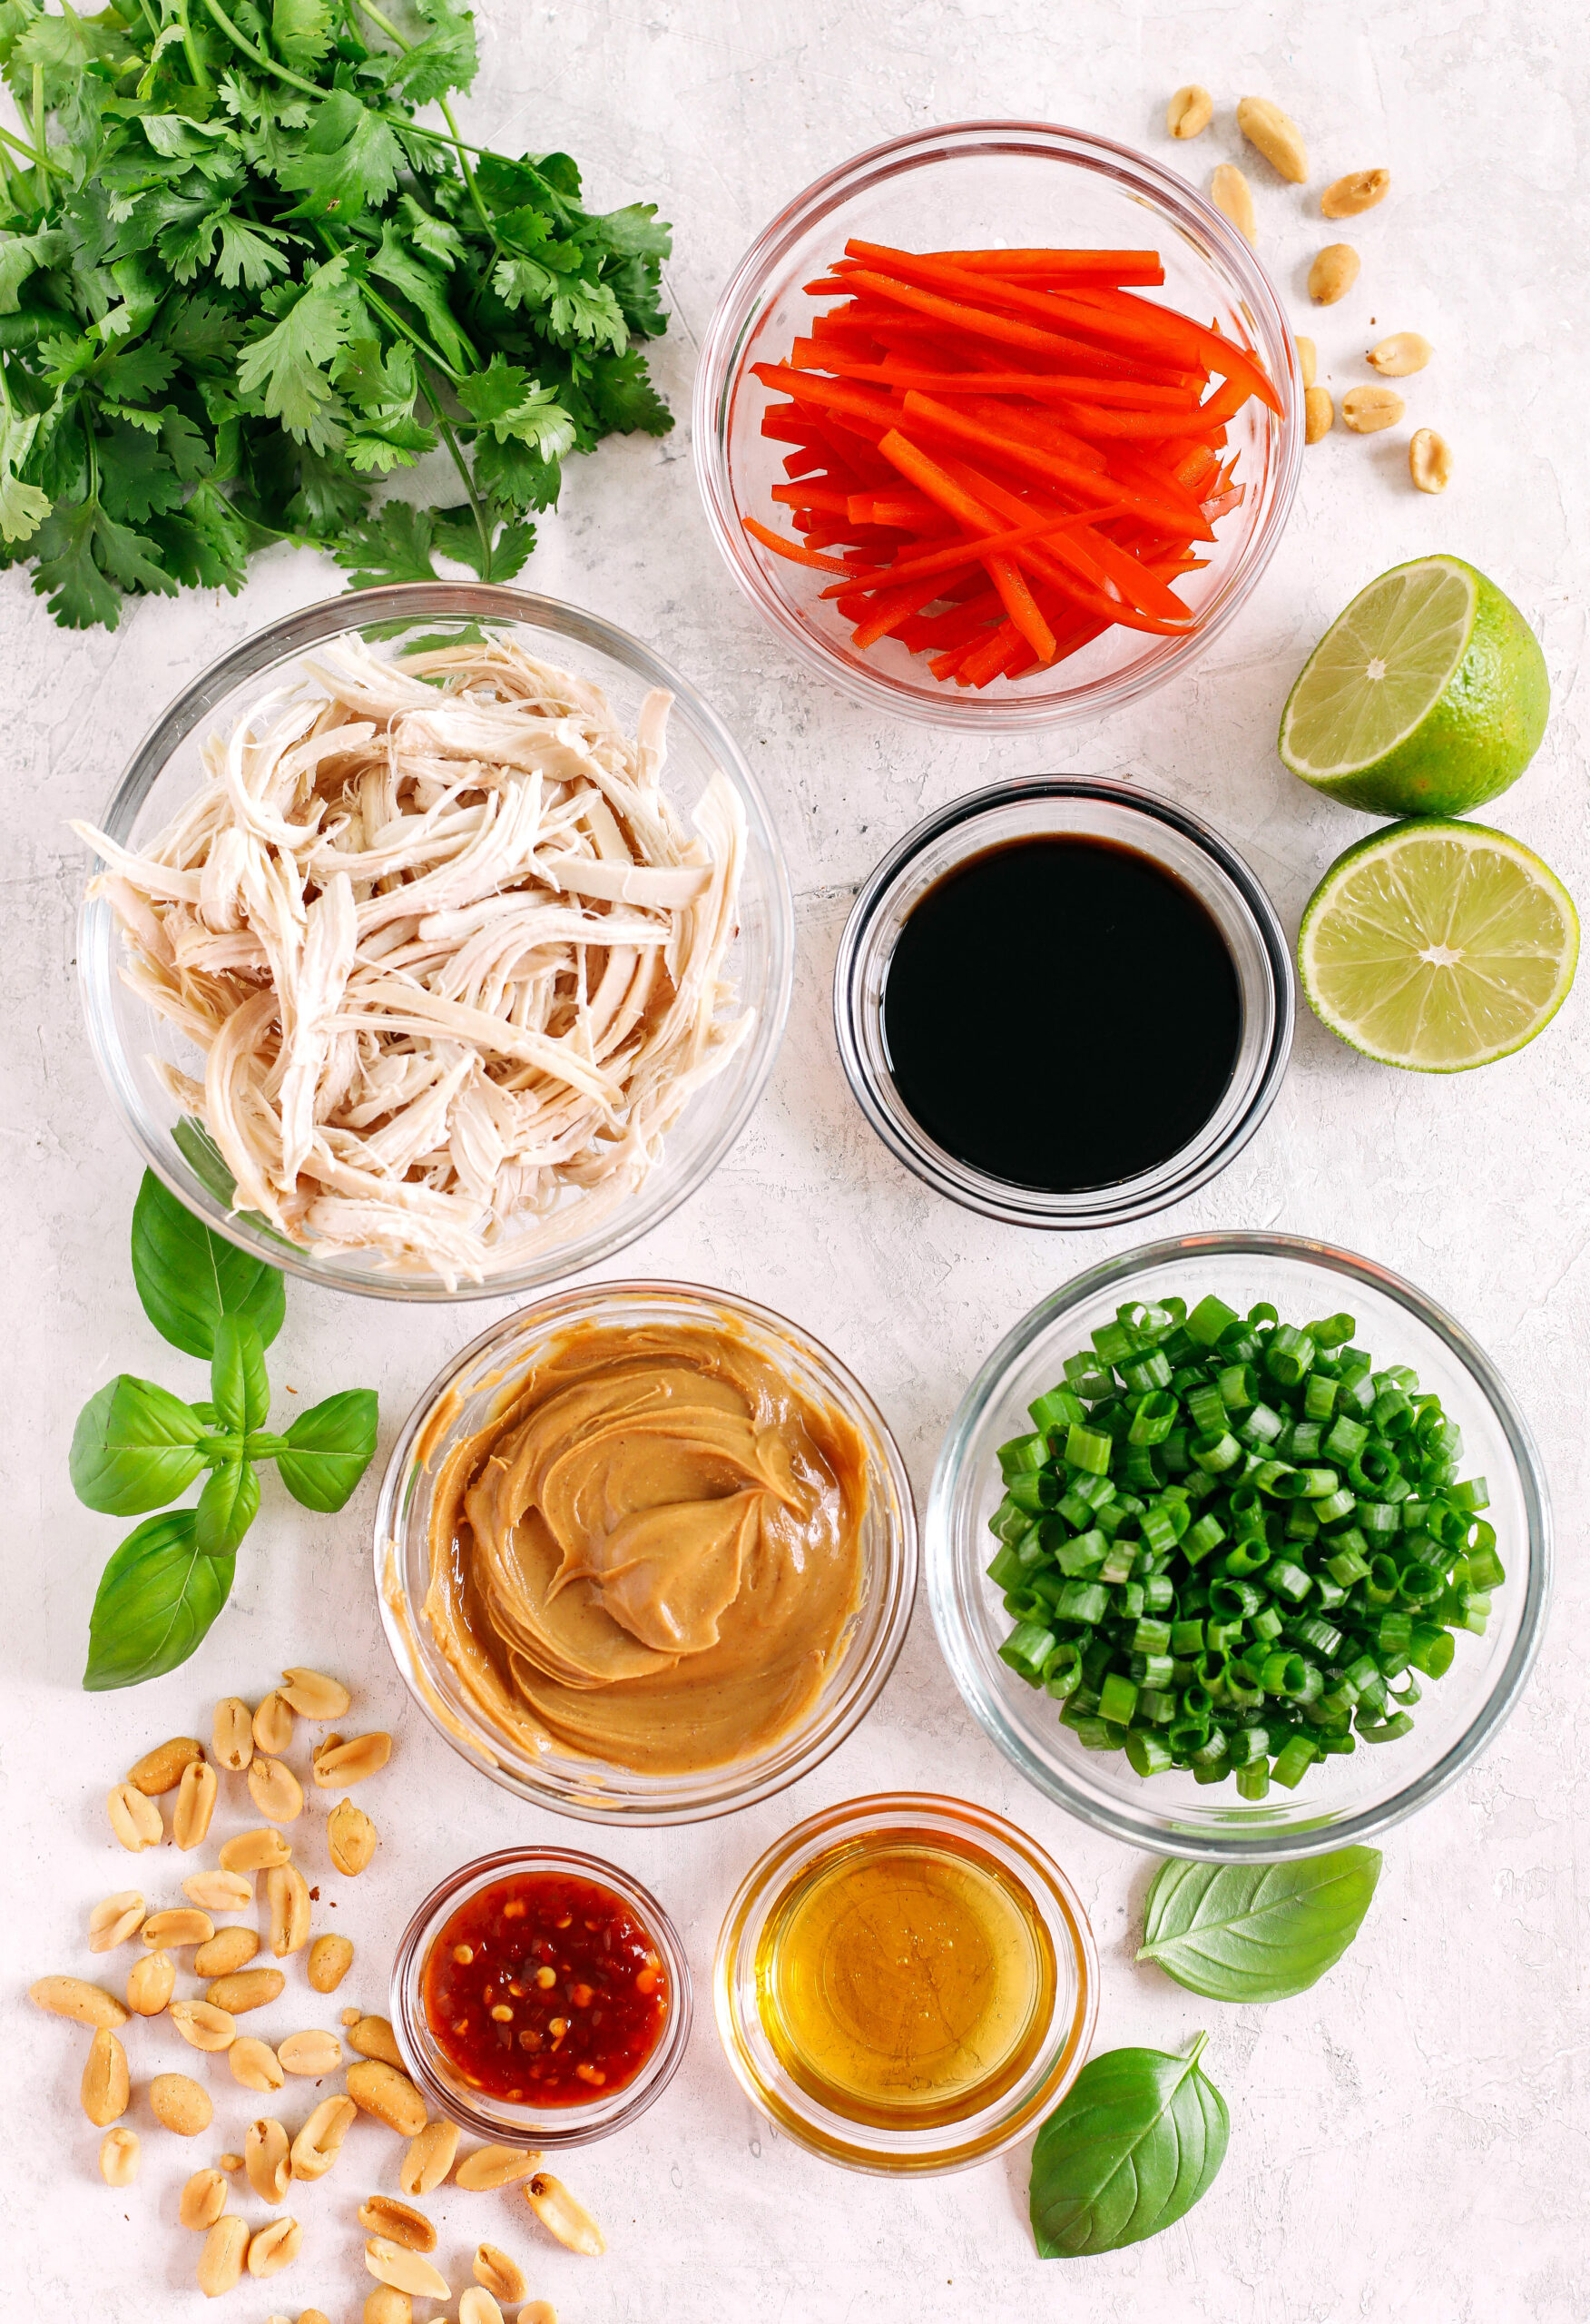 These Asian Peanut Noodles are loaded with shredded chicken, bell pepper, green onions, crunchy peanuts and fresh herbs all tossed together in a delicious peanut sauce!